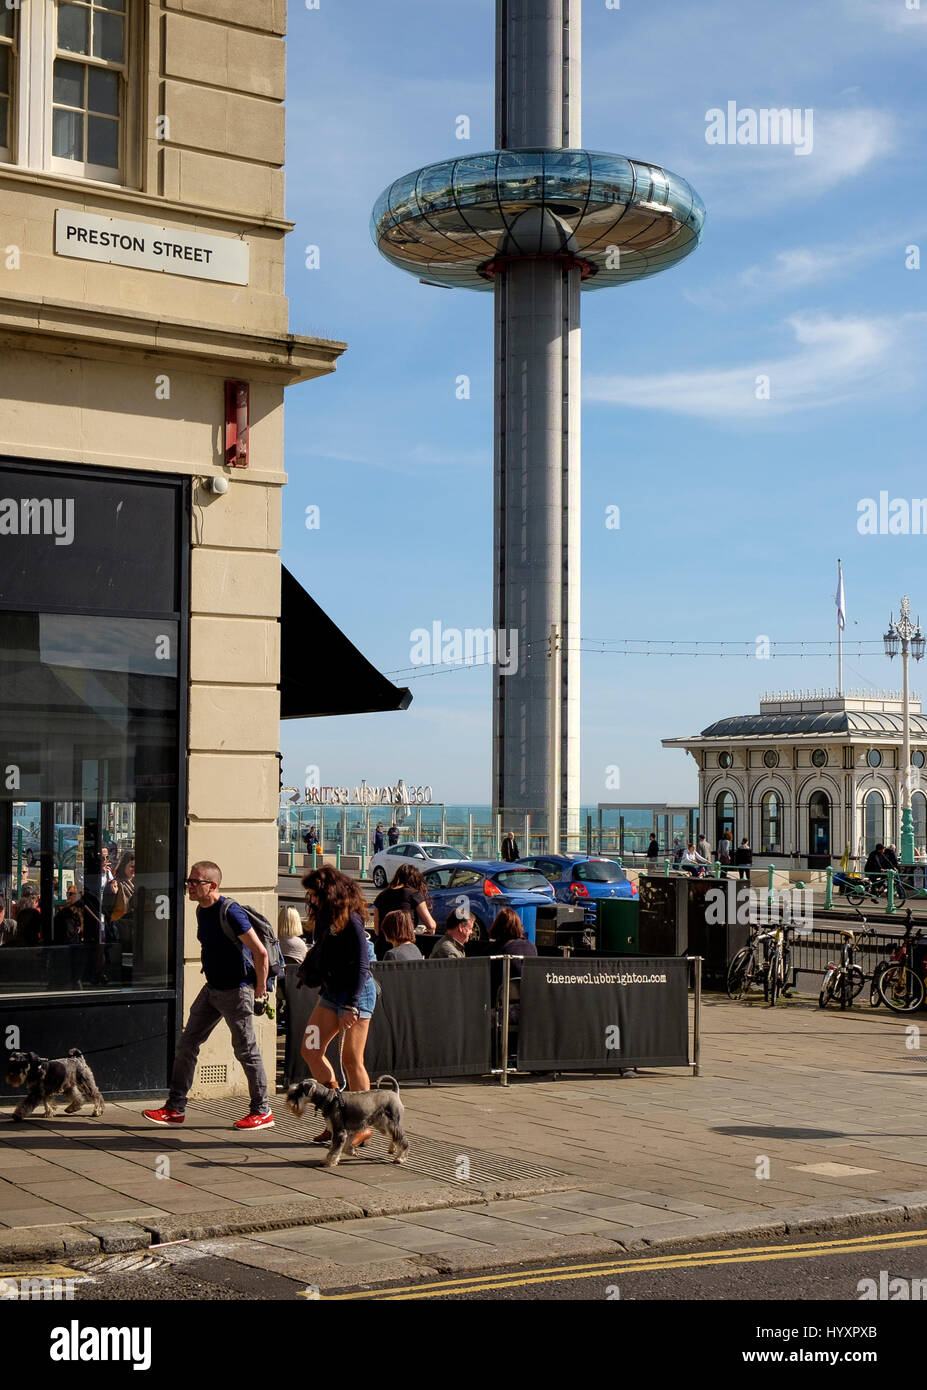 30 March 2017: The pod of the British Airways i360 observation tower ascends from promenade level to 450 feet  above people at seafront cafes in Brigh Stock Photo